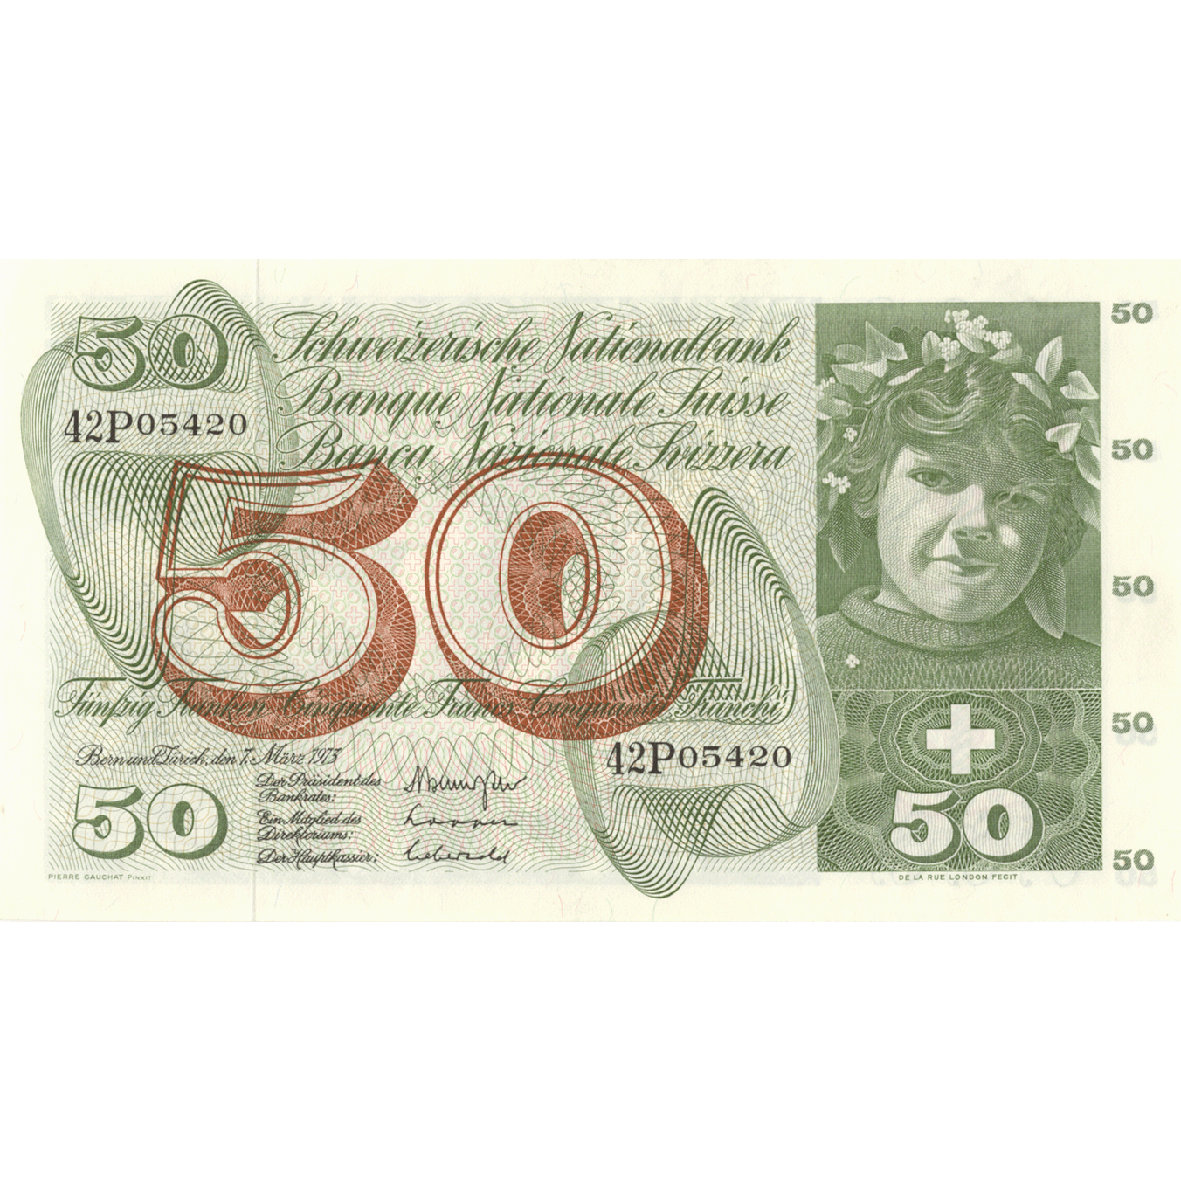 Swiss Confederation, 50 Francs (5th Banknote Series, in Circulation 1956-1980) (obverse)